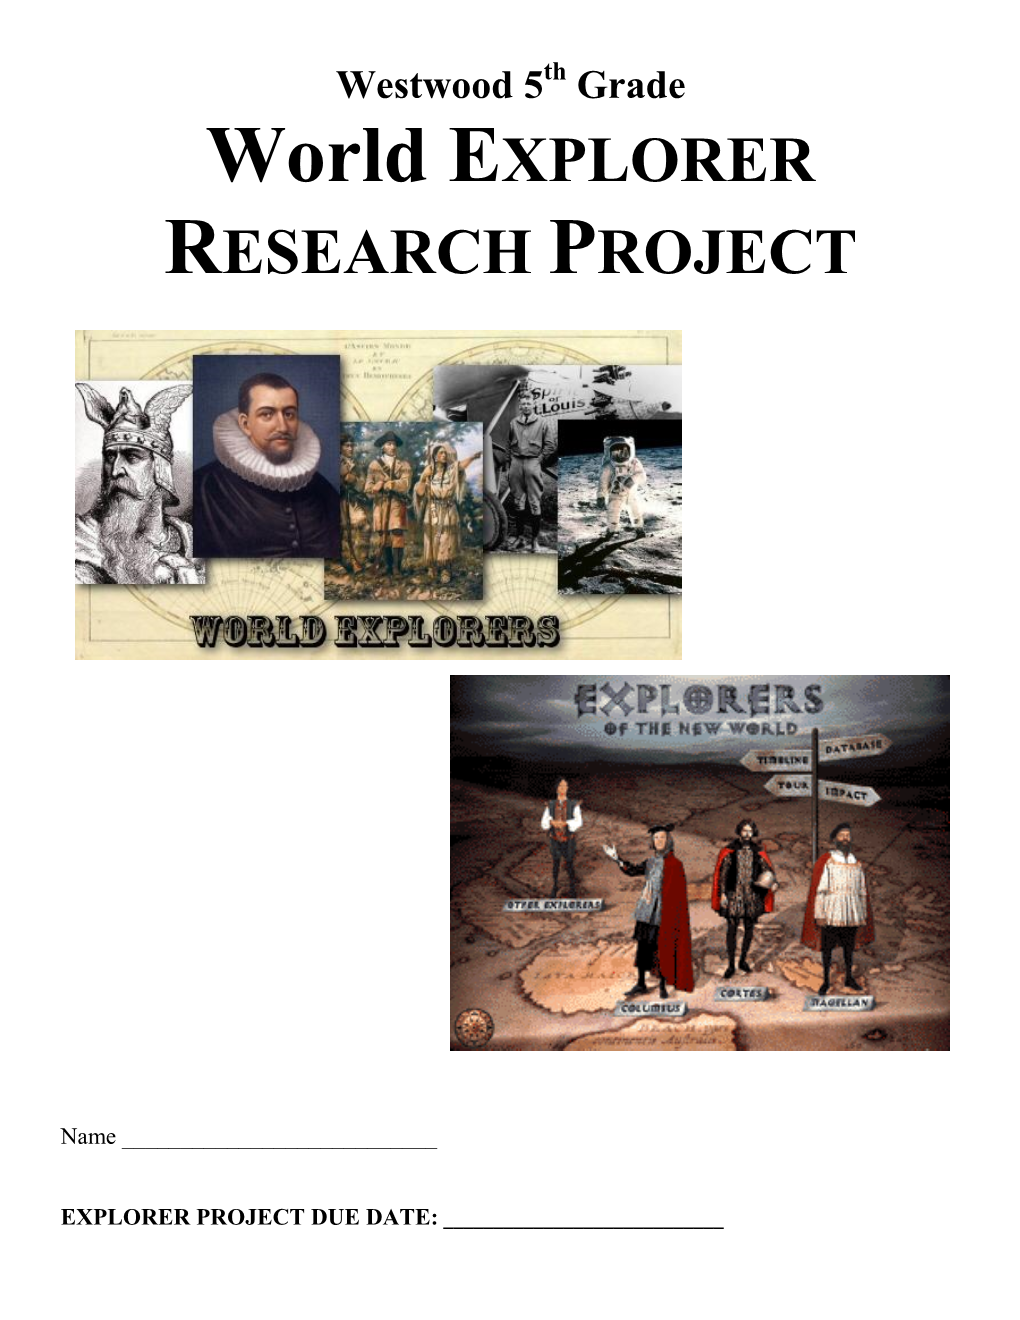 World EXPLORER RESEARCH PROJECT